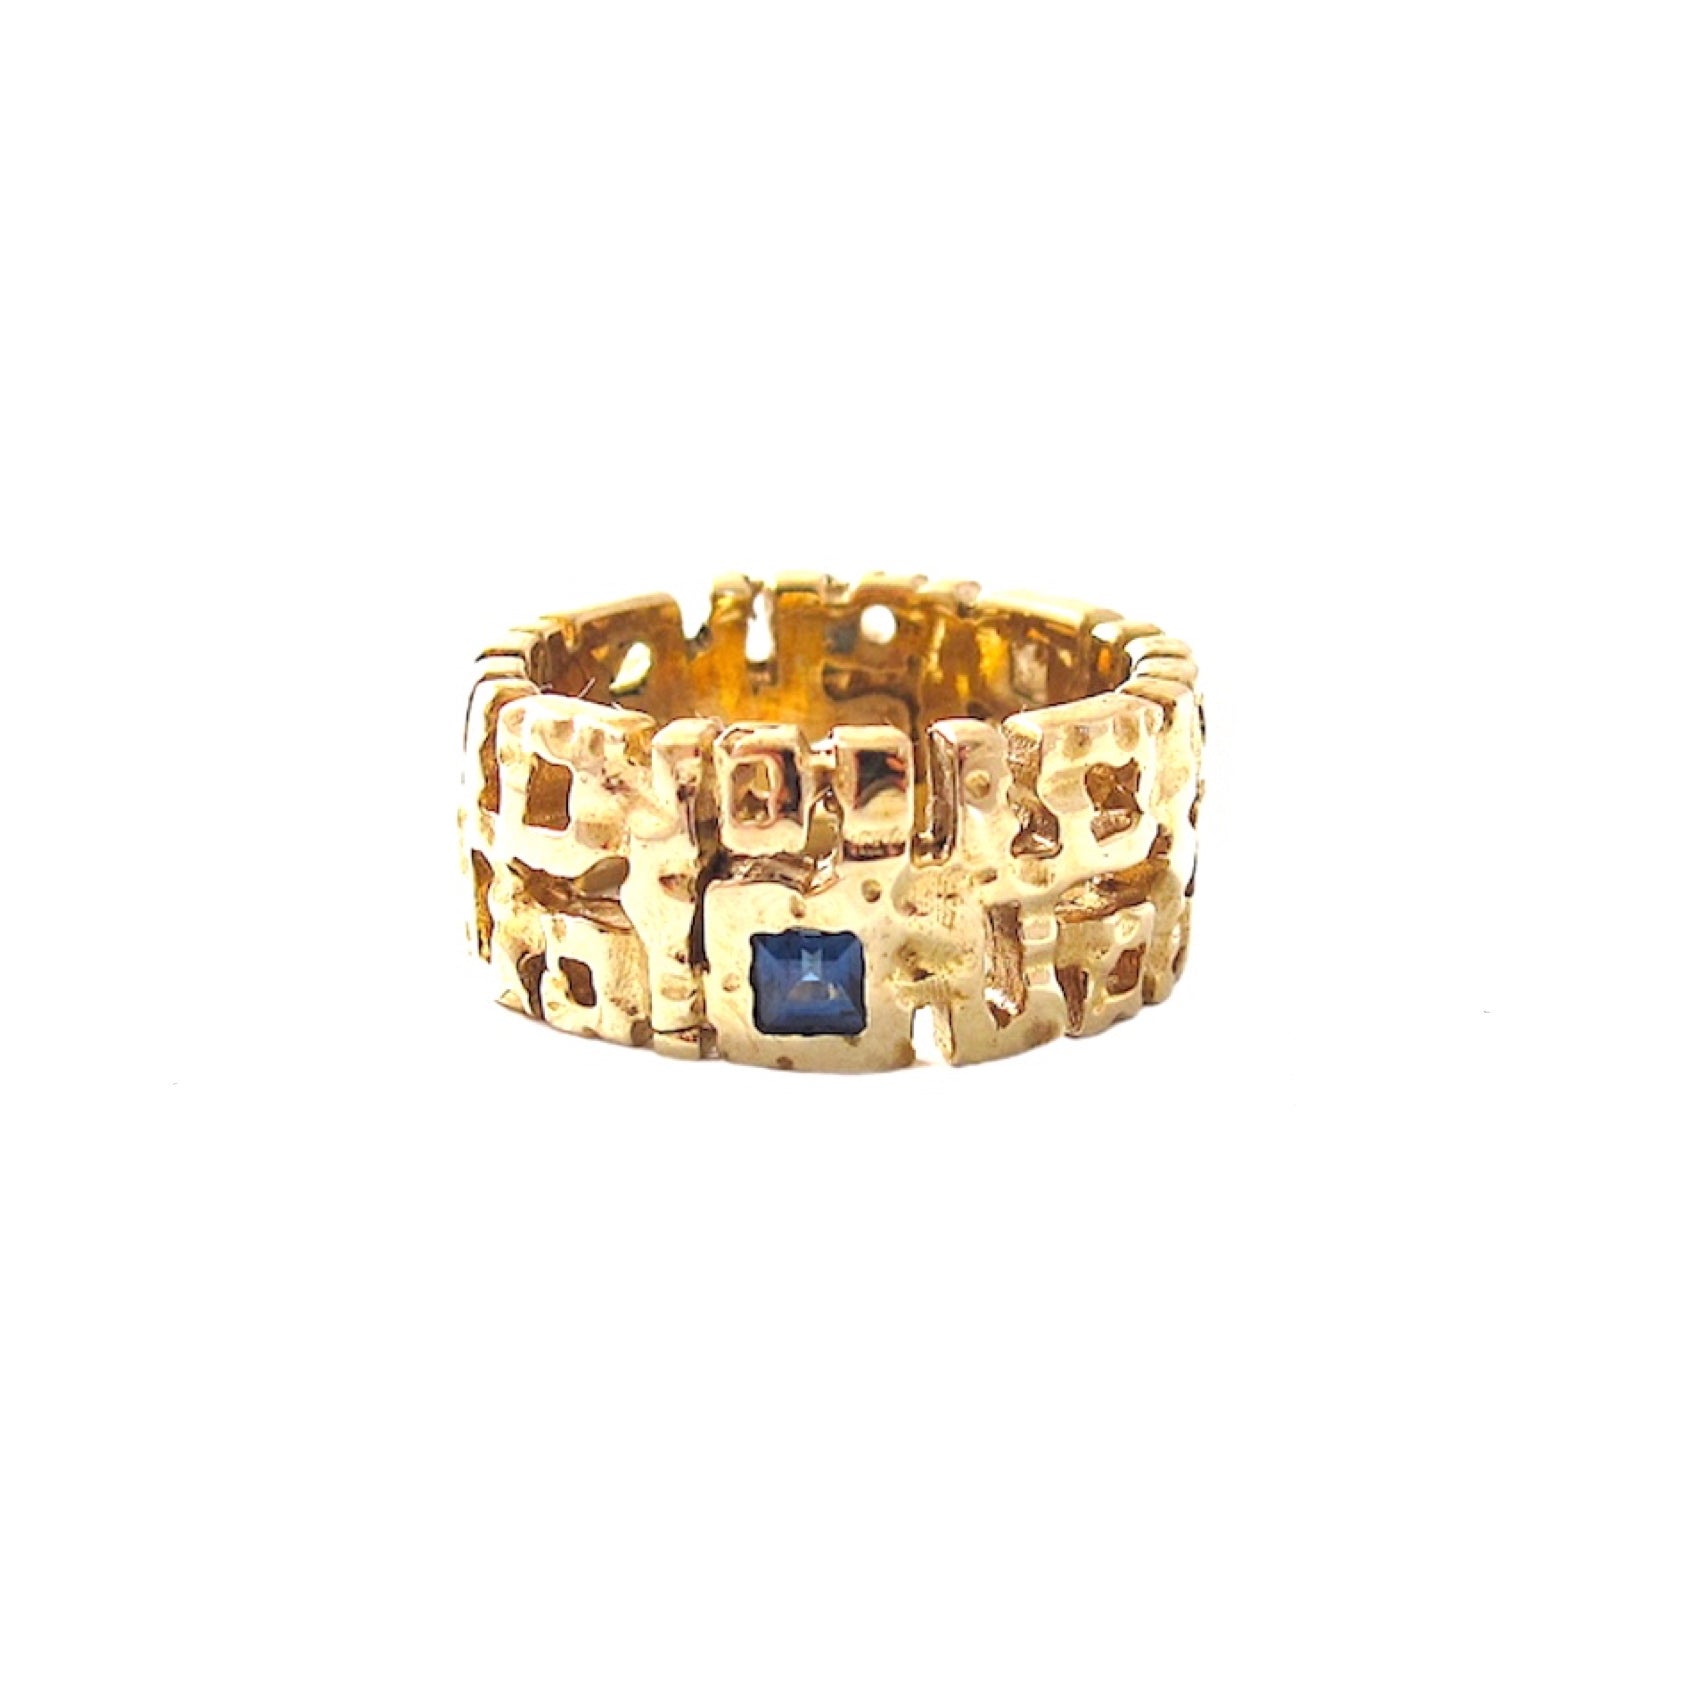 Lucca sapphire cigar band